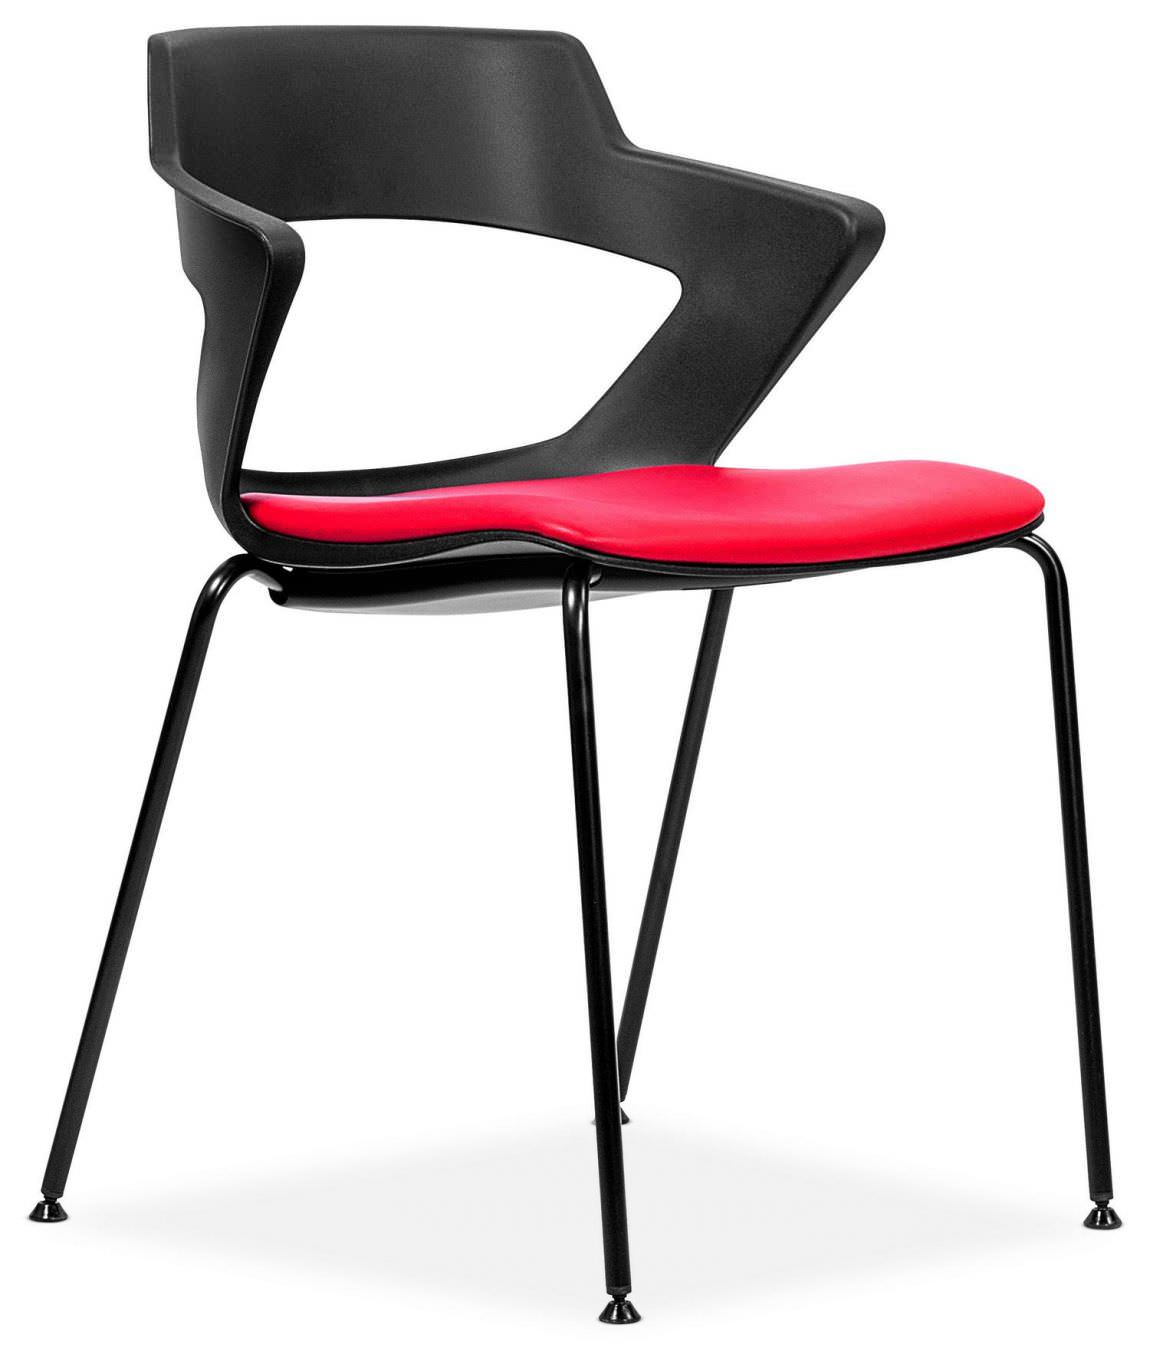 Black Stacking Chair with Padded Seat